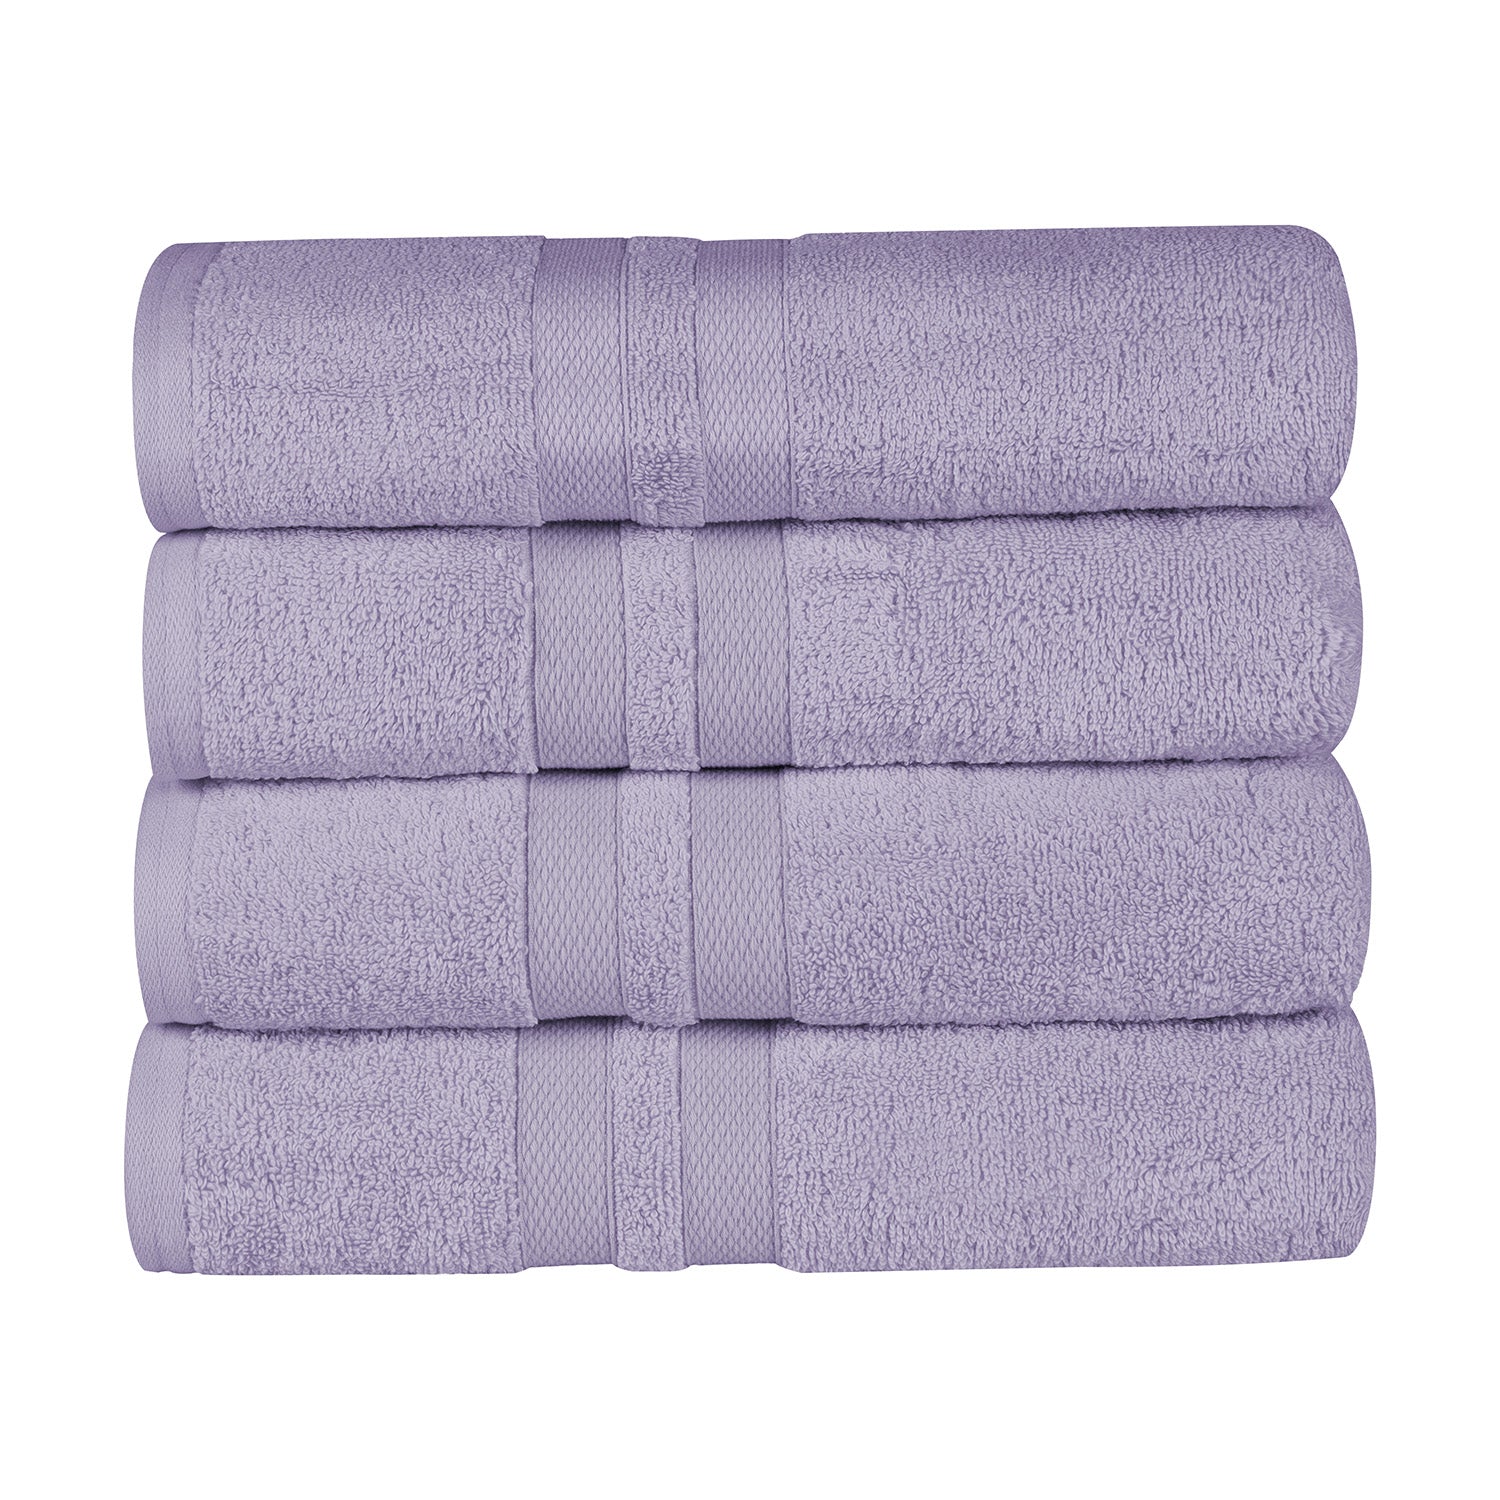 Superior Ultra Soft Cotton Absorbent Solid Bath Towel (Set of 4) -  Wisteria